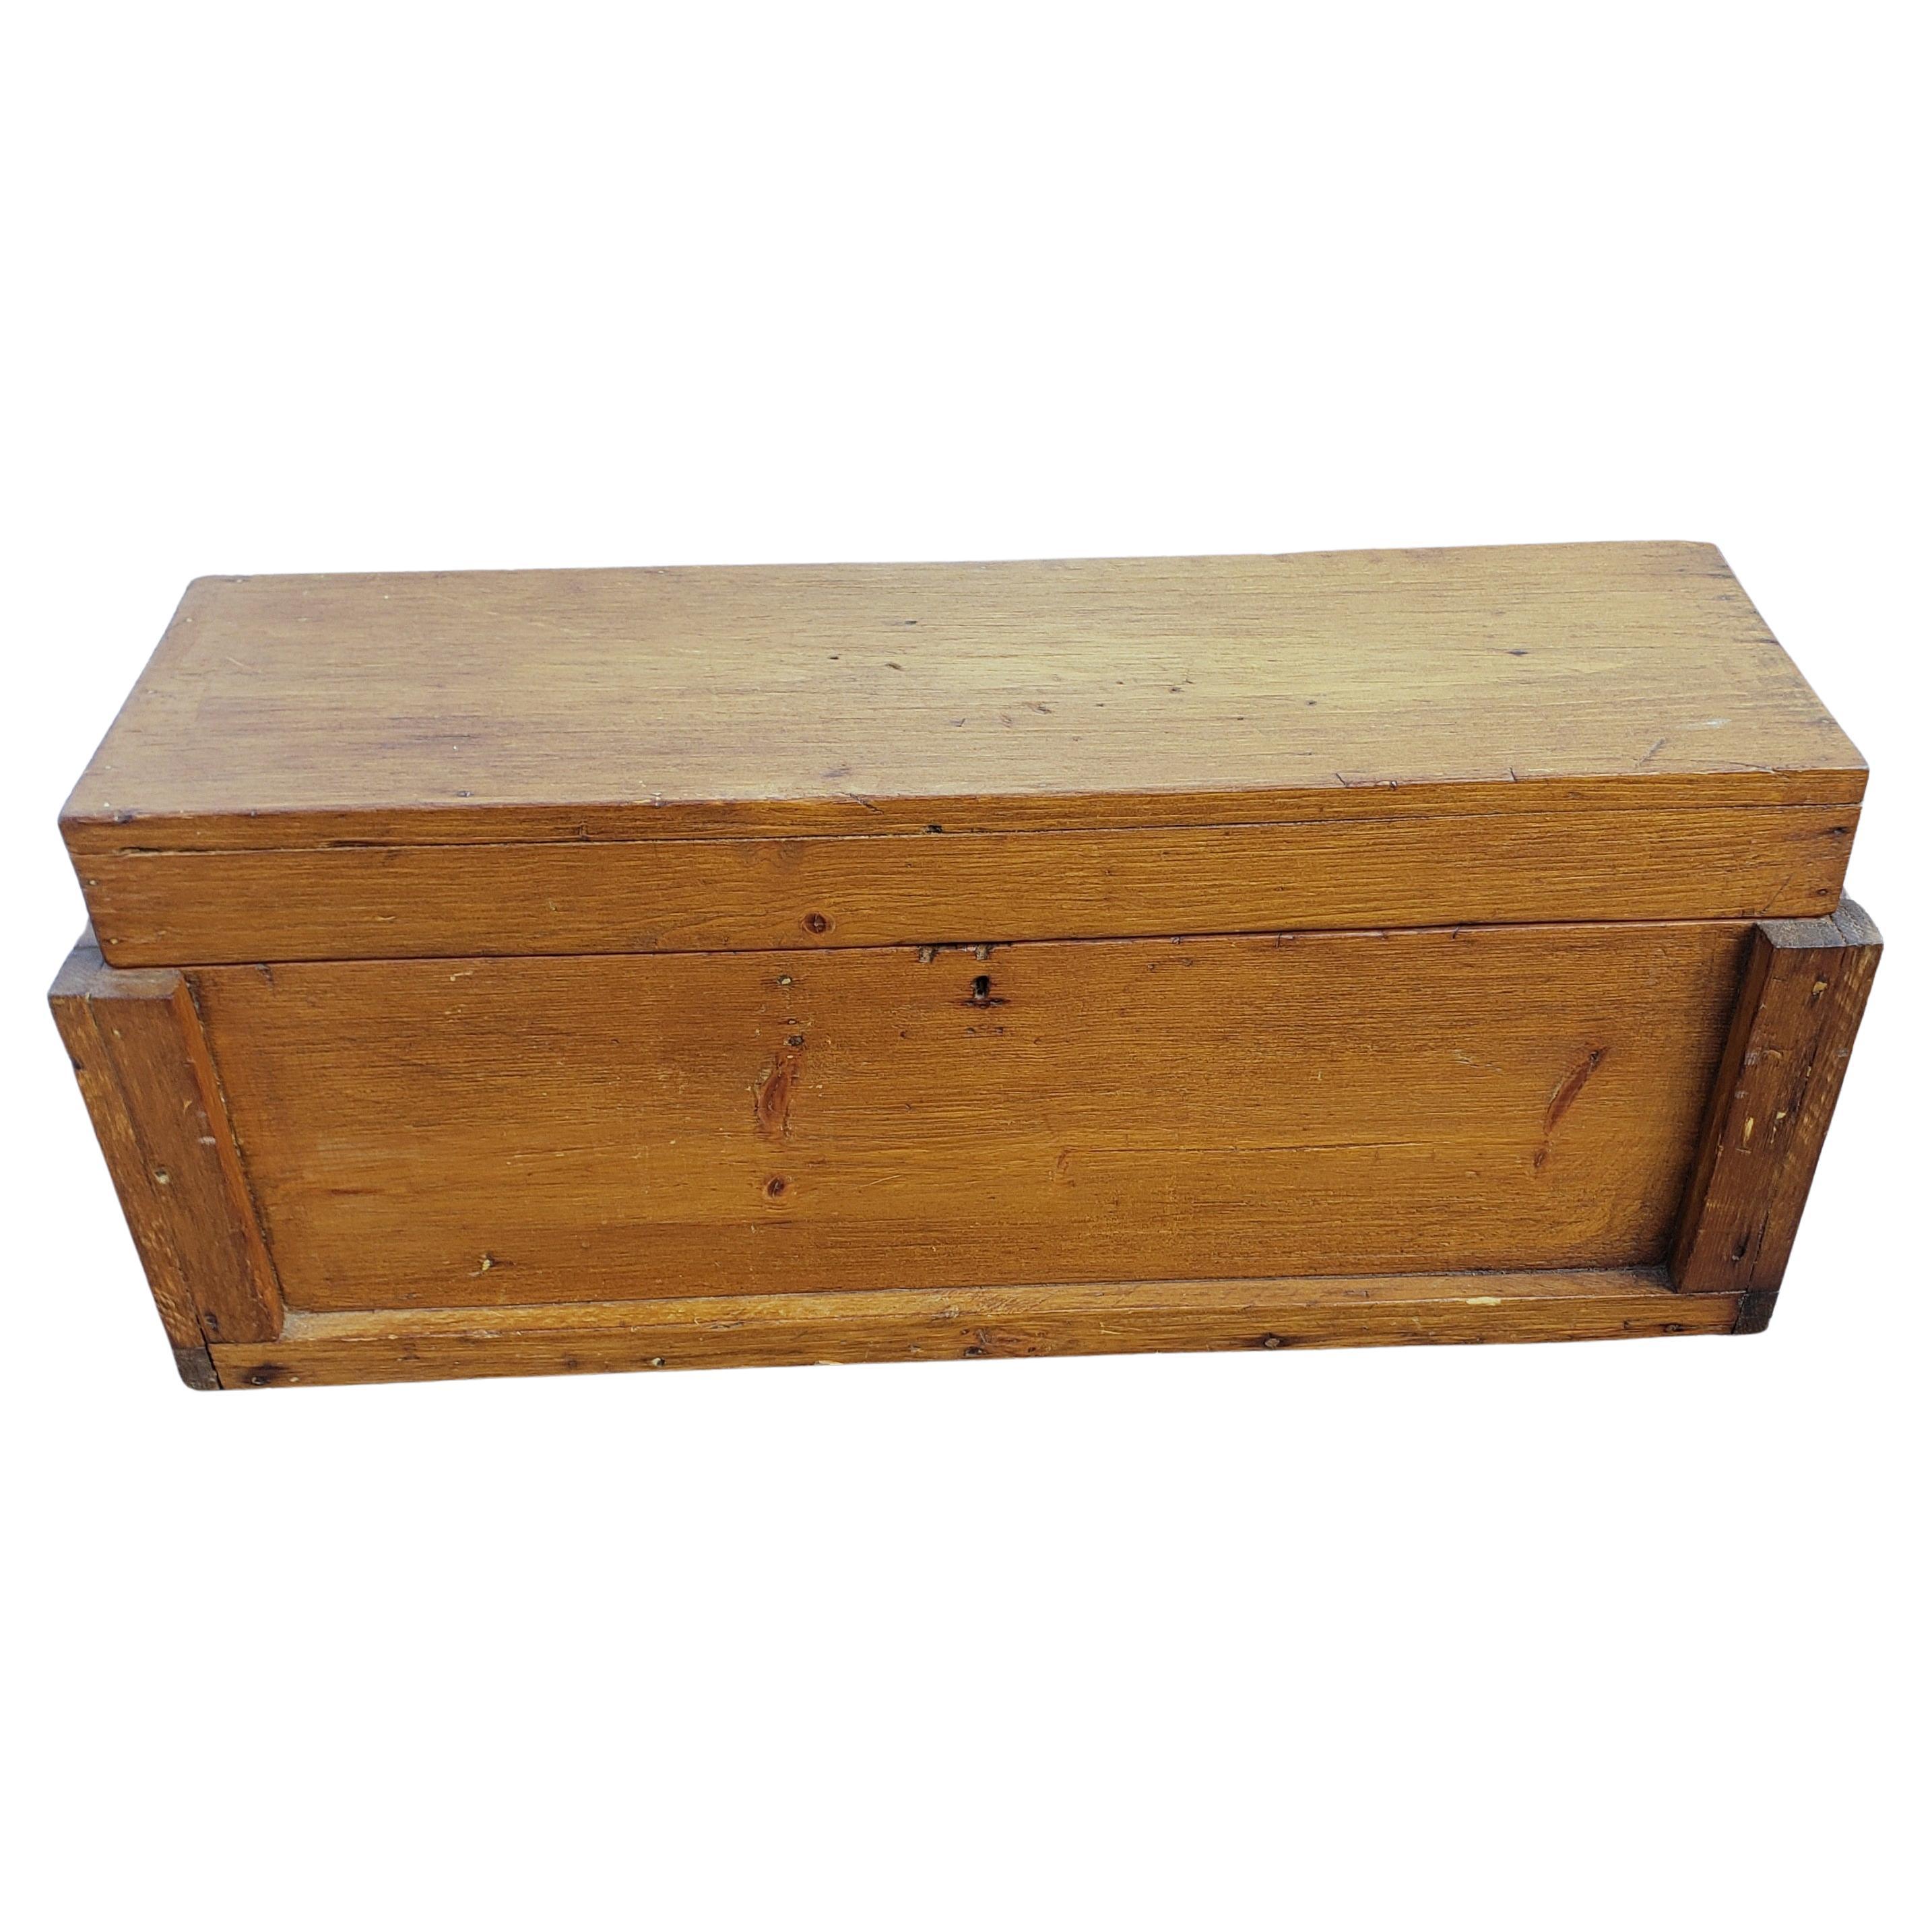 Hand-Crafted Early 20th Century American Primitive Wooden Tool Box For Sale